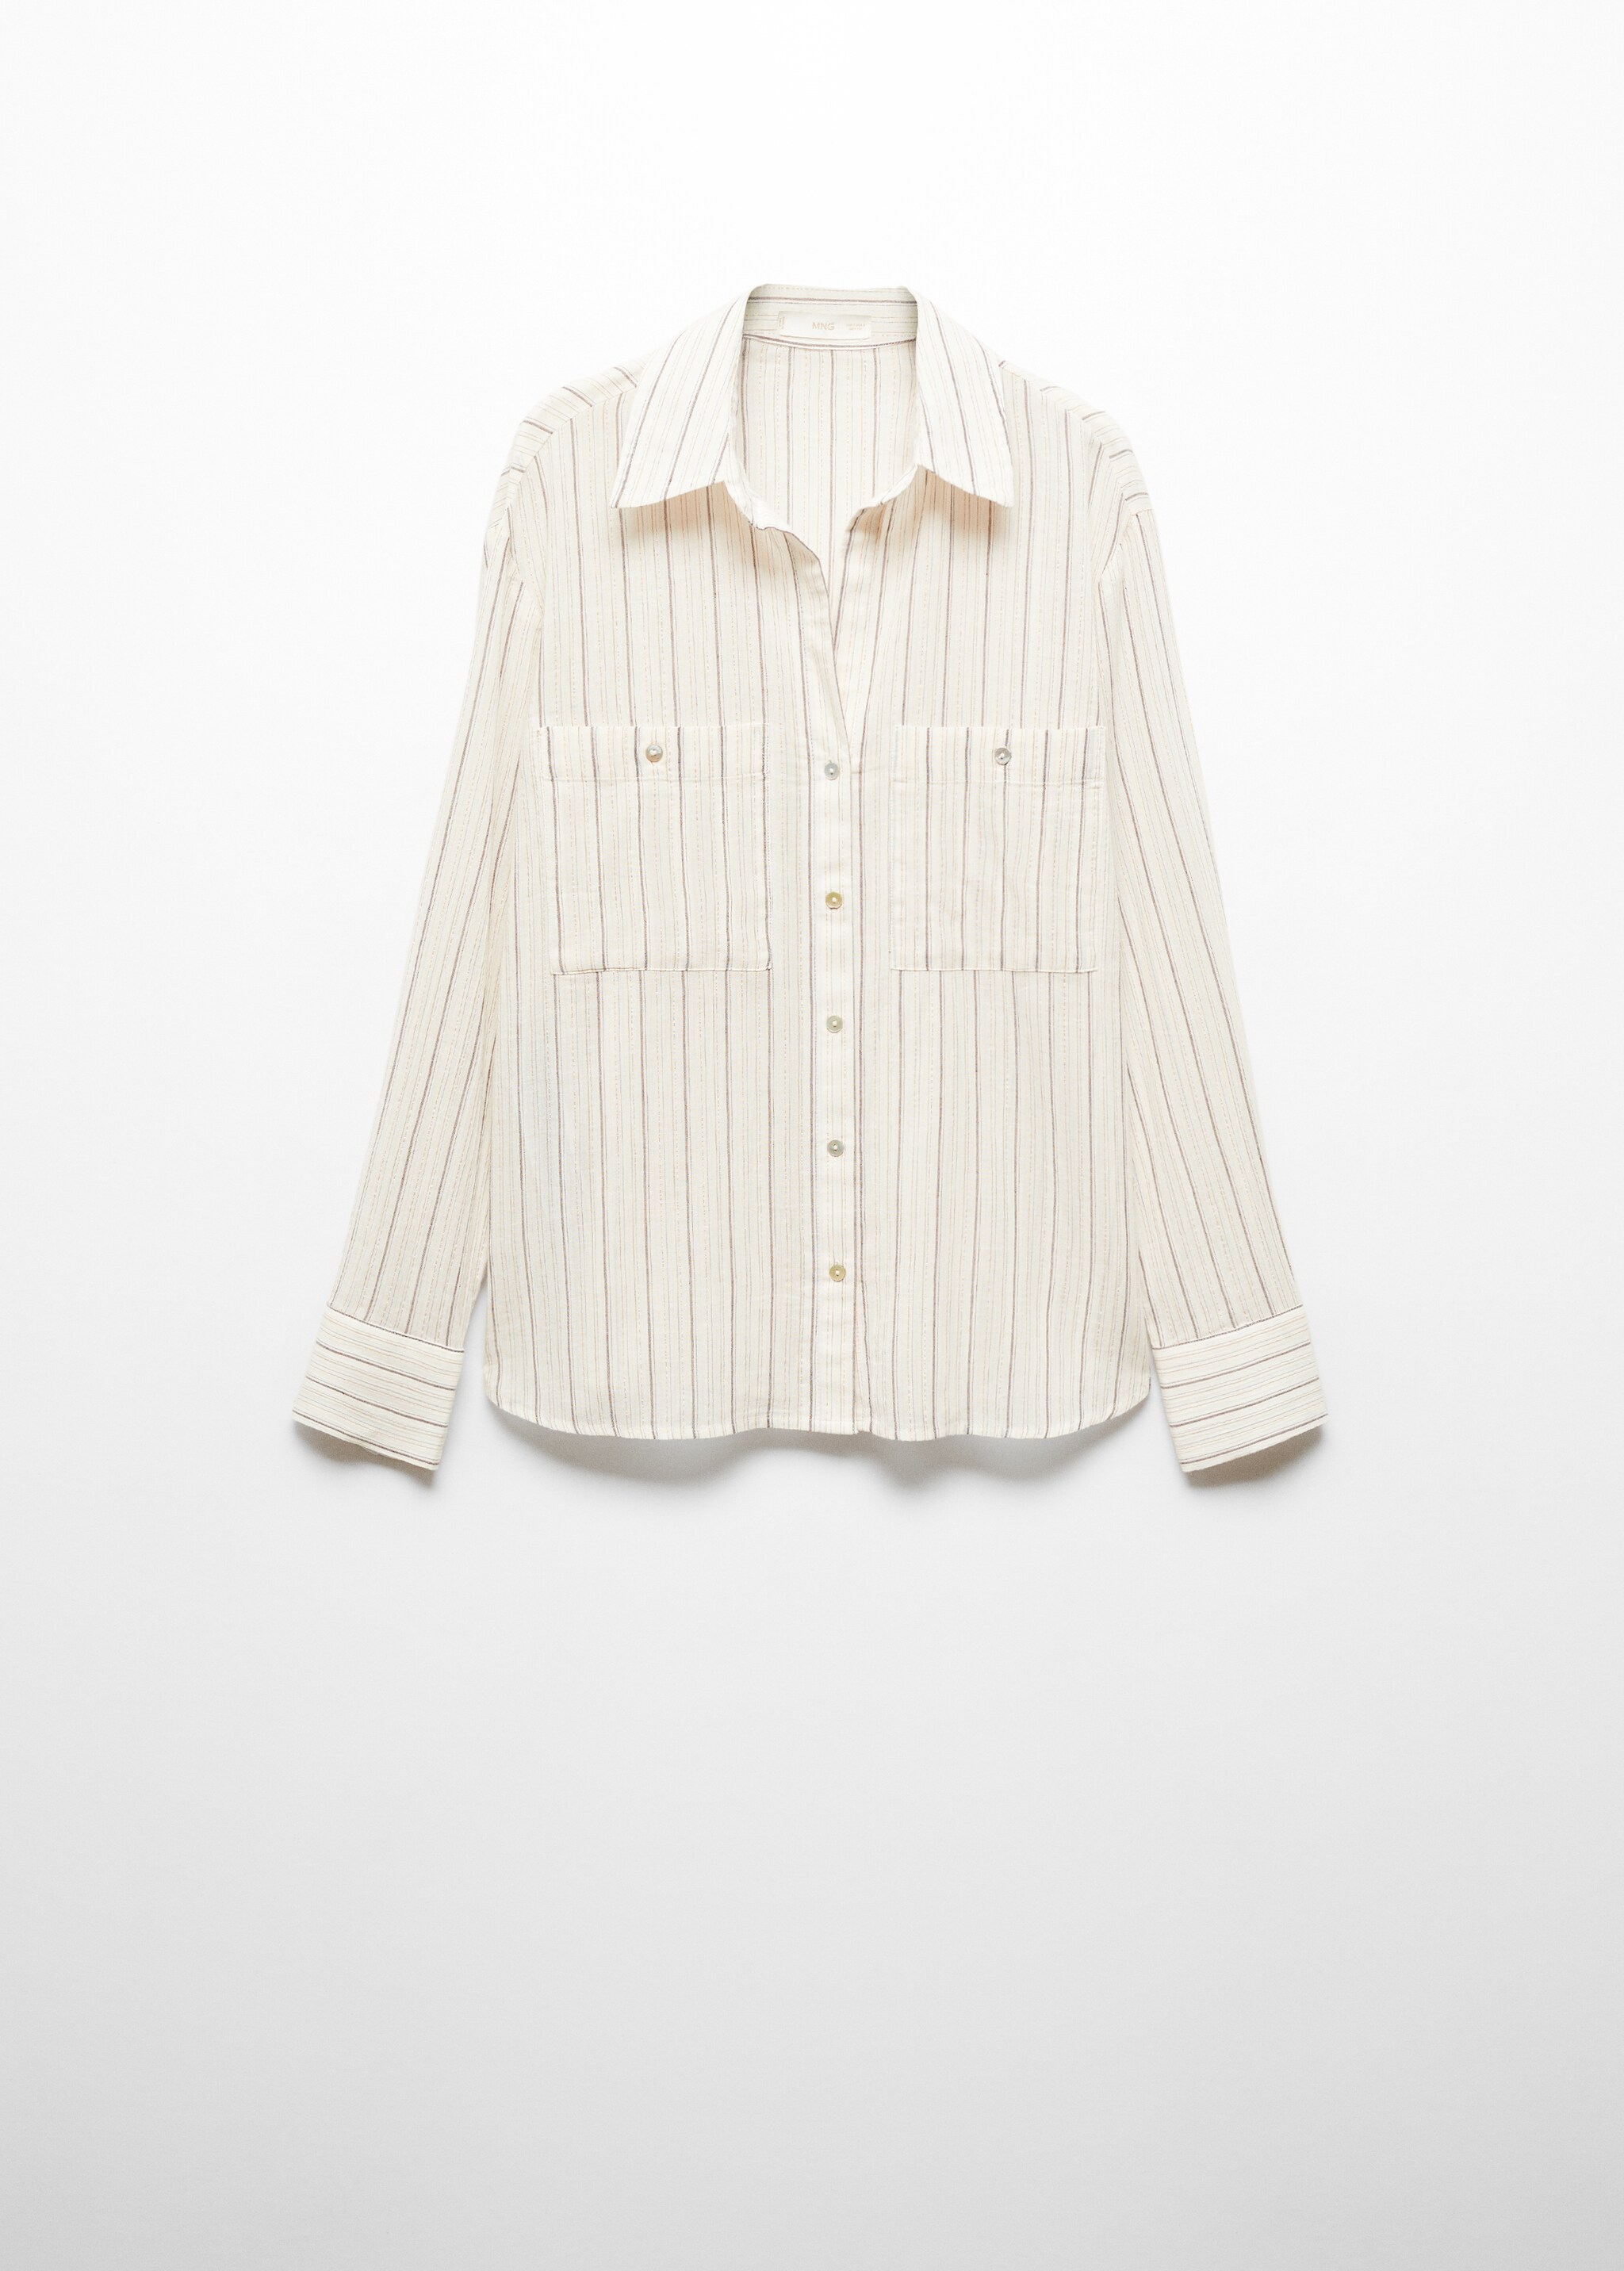 Pocket striped shirt - Article without model